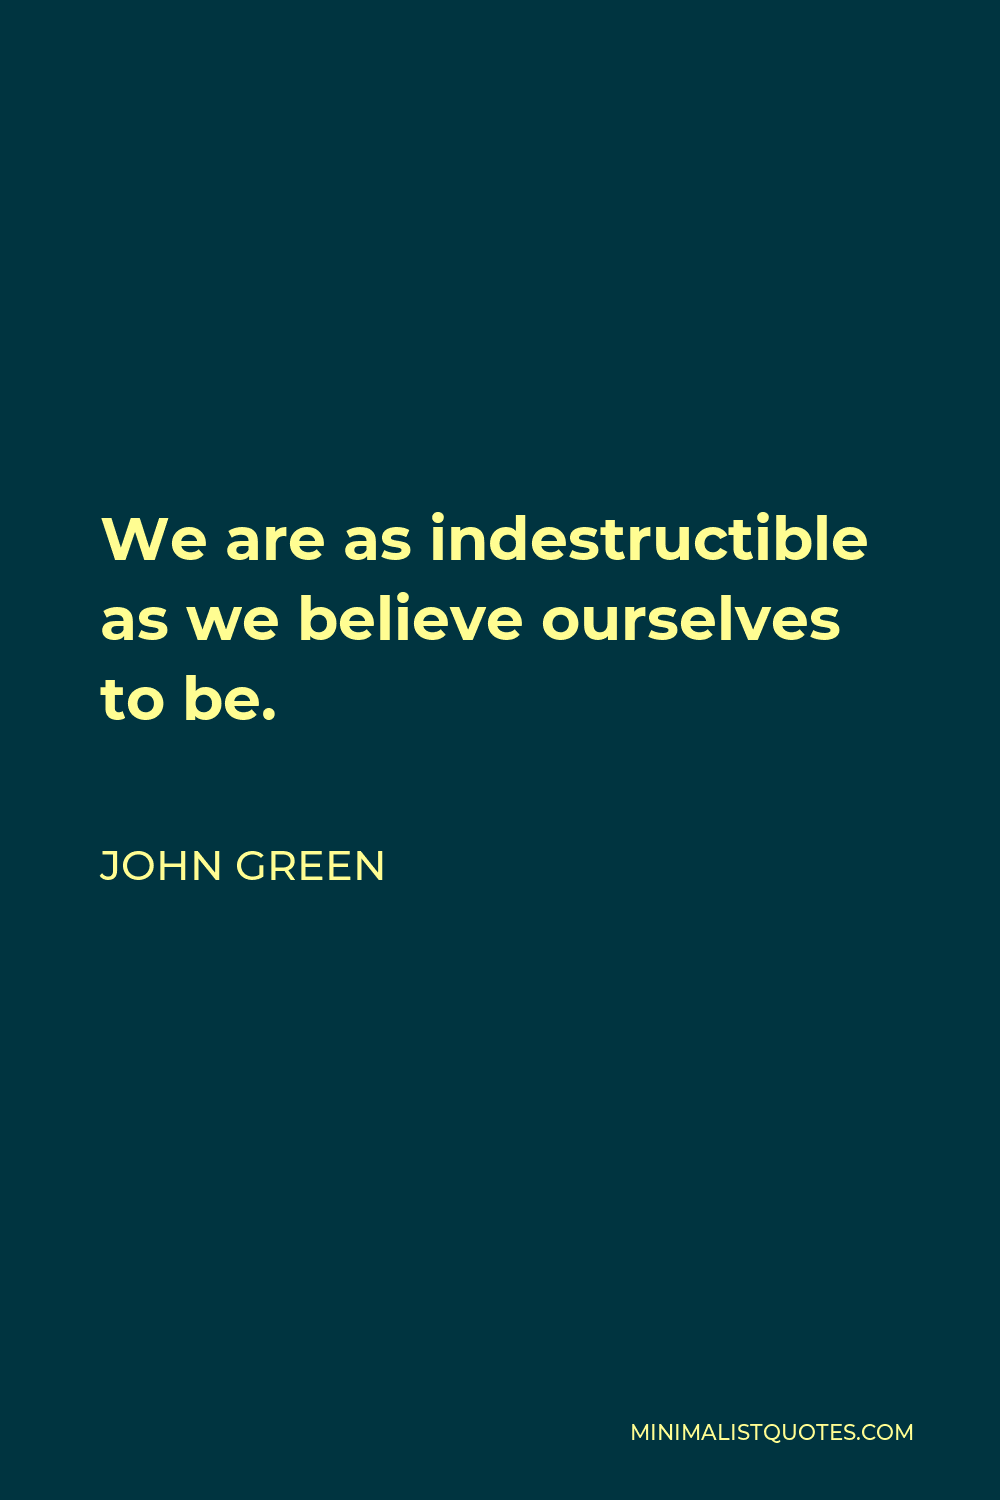 John Green Quote - We are as indestructible as we believe ourselves to be.